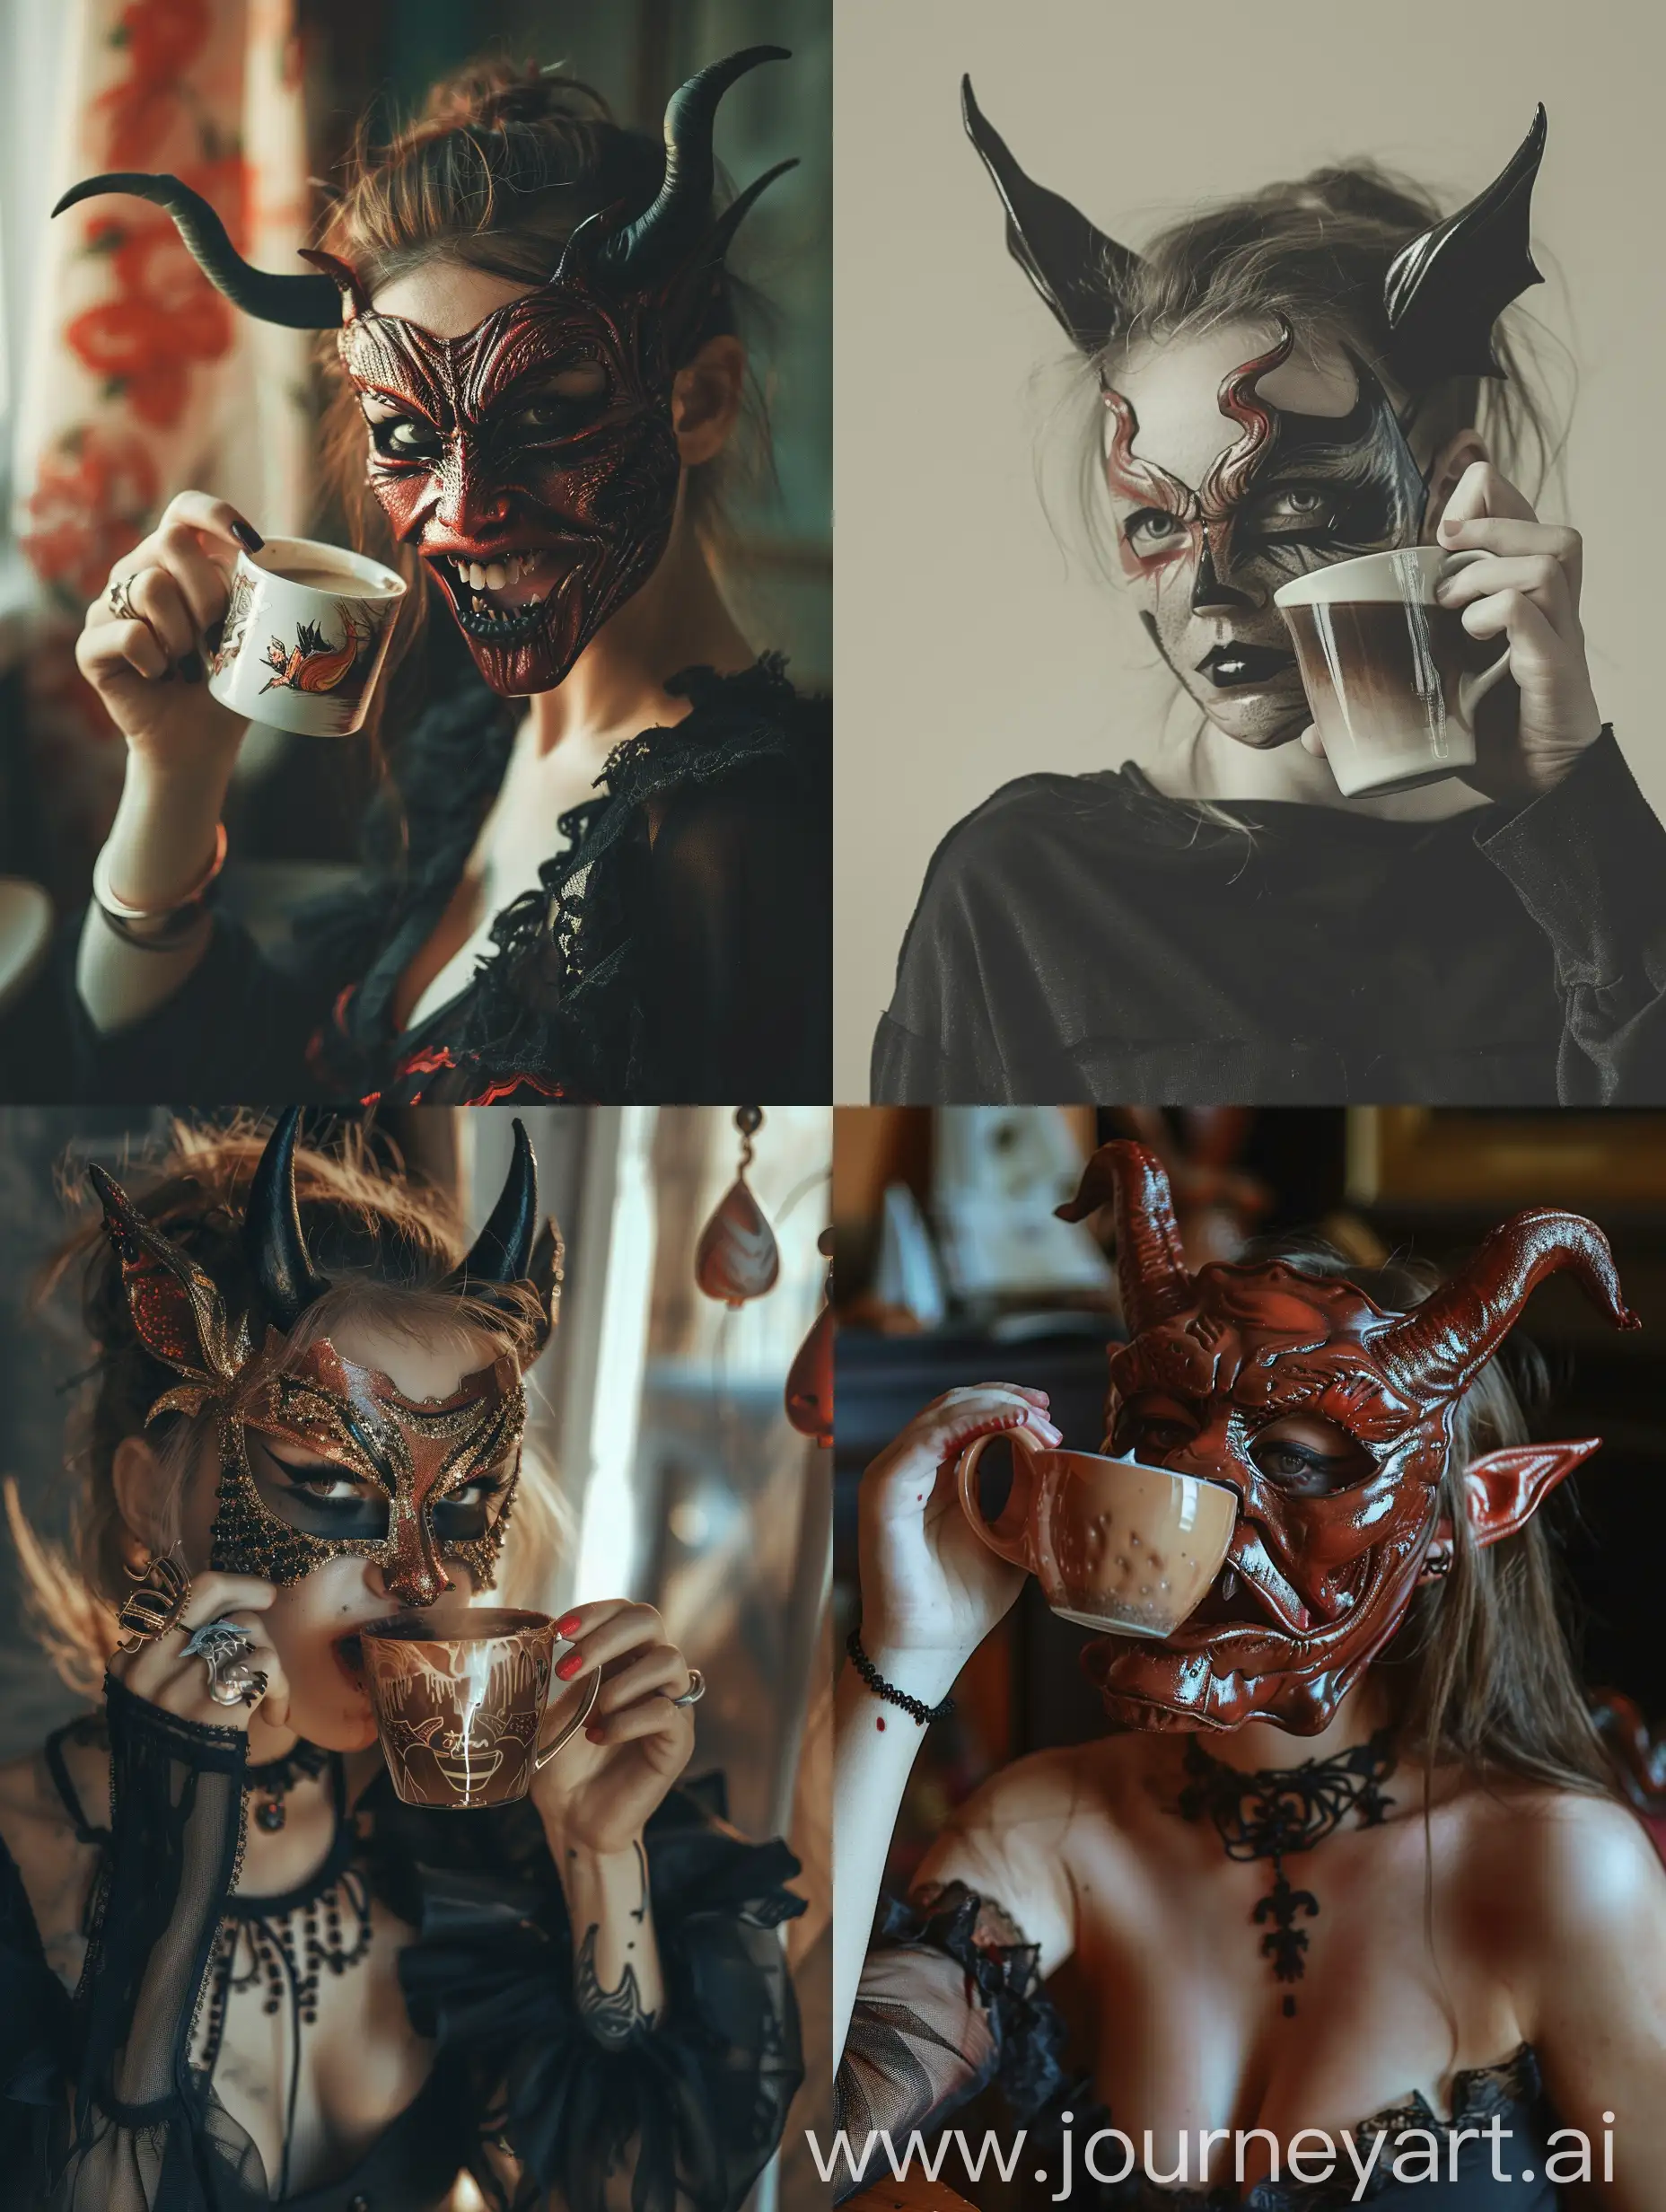 a woman with a devil mask and devil makeup drinking a cup of coffee with a demon demon on her face, a stock photo, incoherents, photo real, Artur Tarnowski